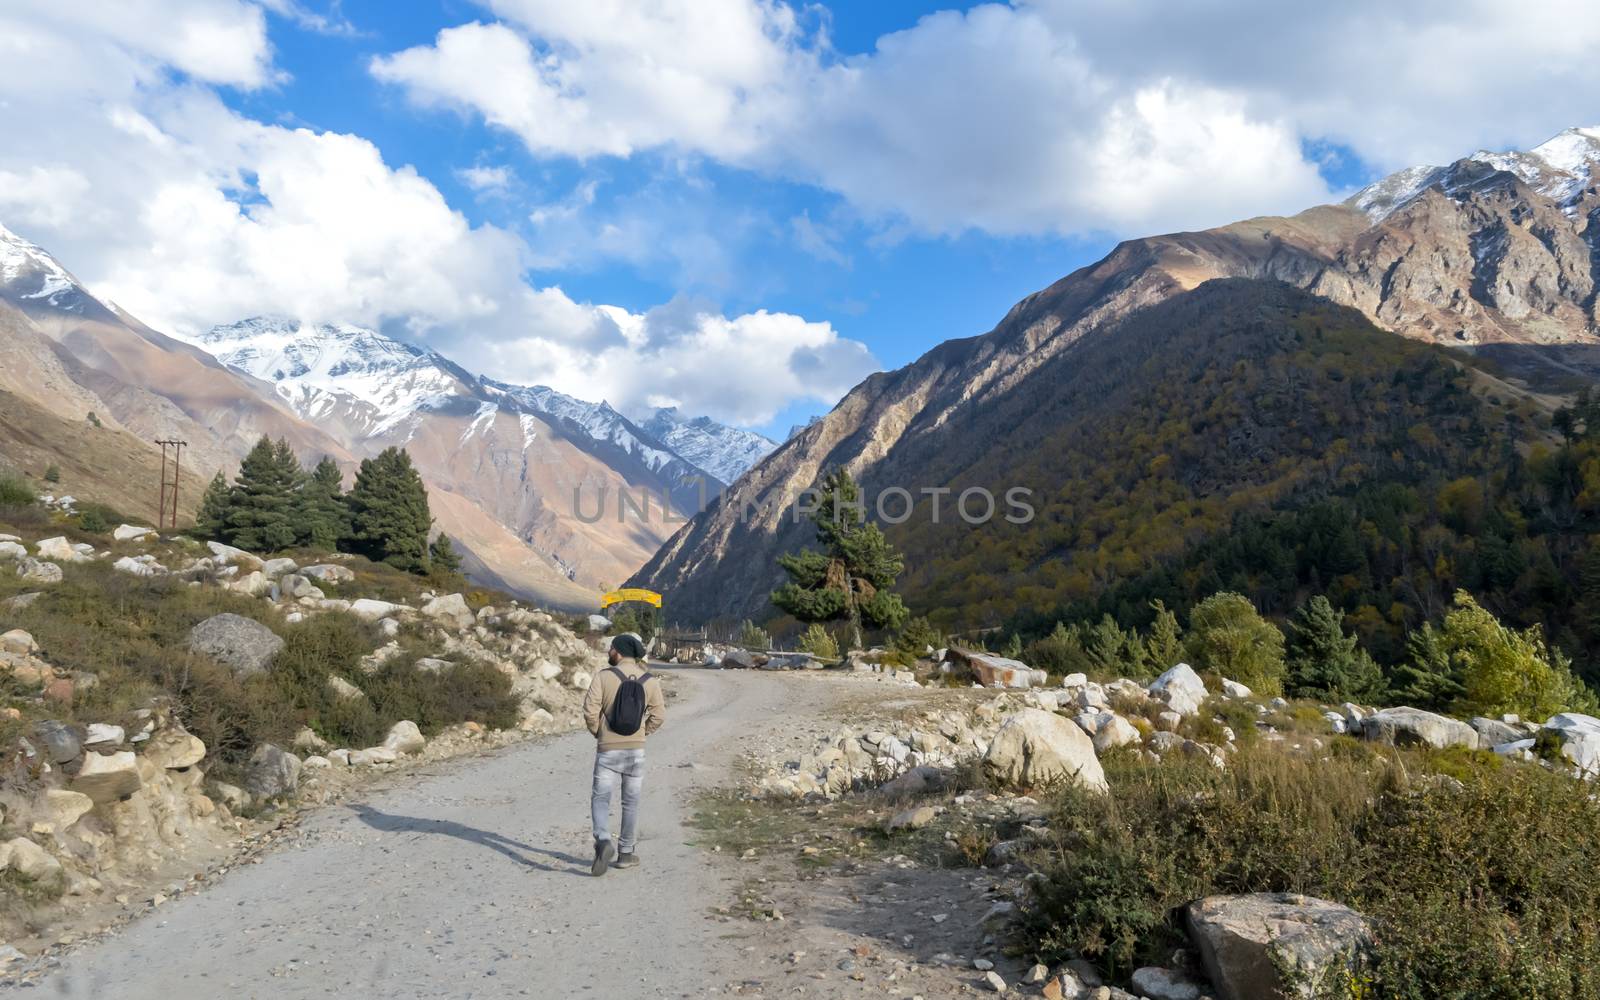 Rear View of Solo Indian traveler in winter clothing walking alone hiking a remote mountain road. Snow capped Himalayan mountain with floating clouds and blue sky in background. Spiti Valley Himachal Pradesh India South Asia Pac by sudiptabhowmick